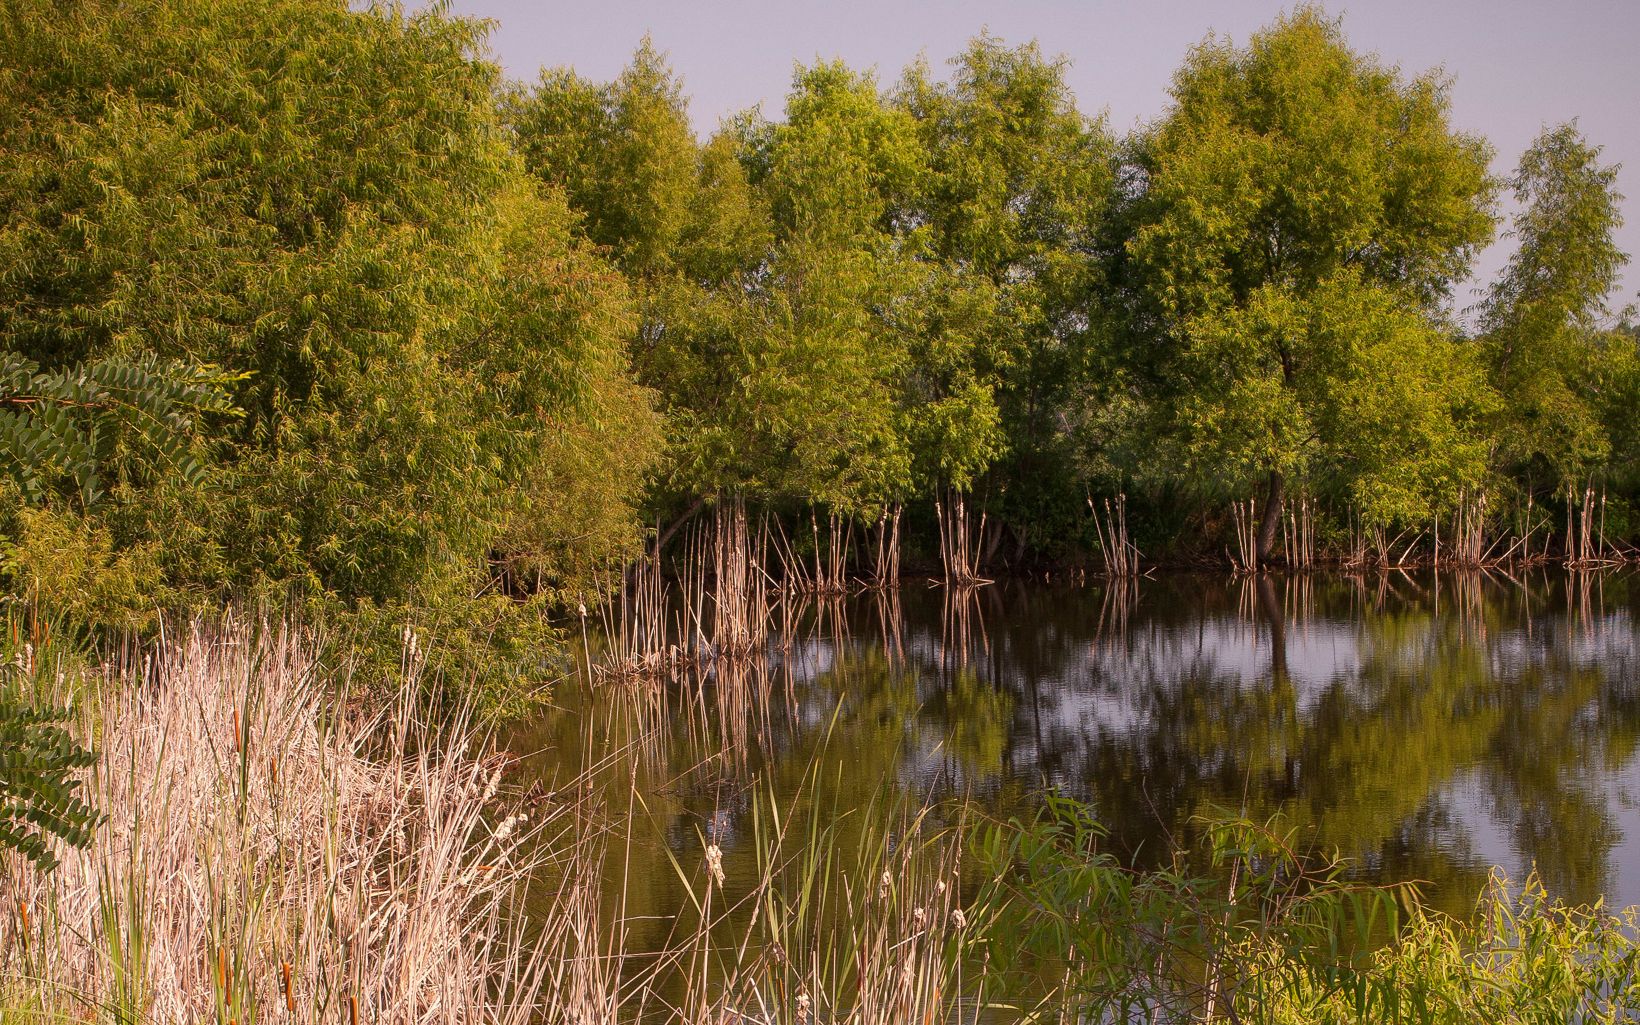 Kentucky's Big Rivers Corridor-Wetlands Wetland areas such as this one act as a filter for pollutants from the surrounding area. © Mark Godfrey/The Nature Conservancy